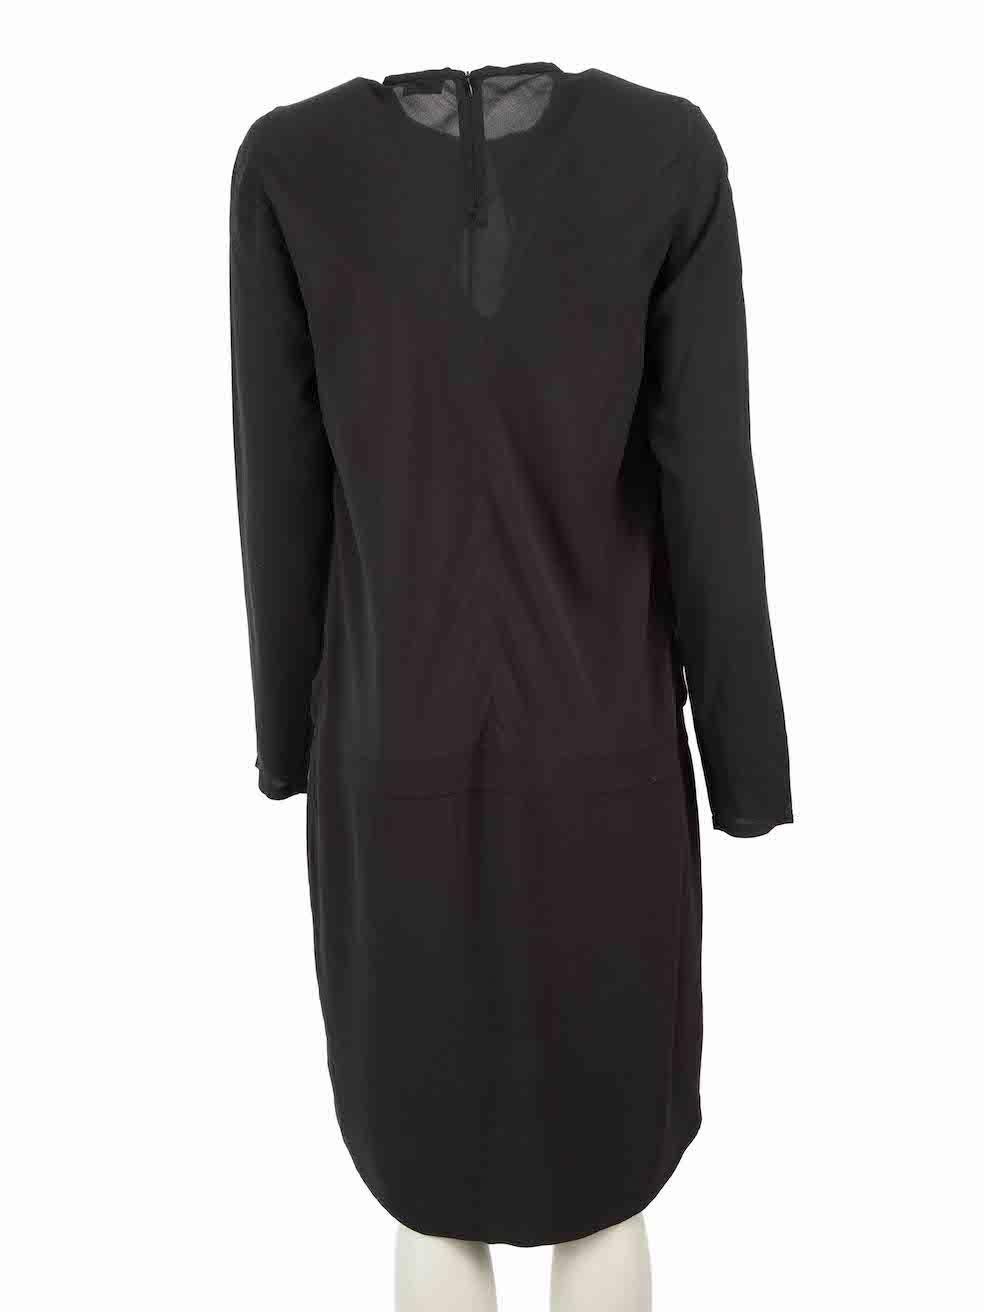 Brunello Cucinelli Black Silk Long Sleeve Dress Size L In Good Condition For Sale In London, GB